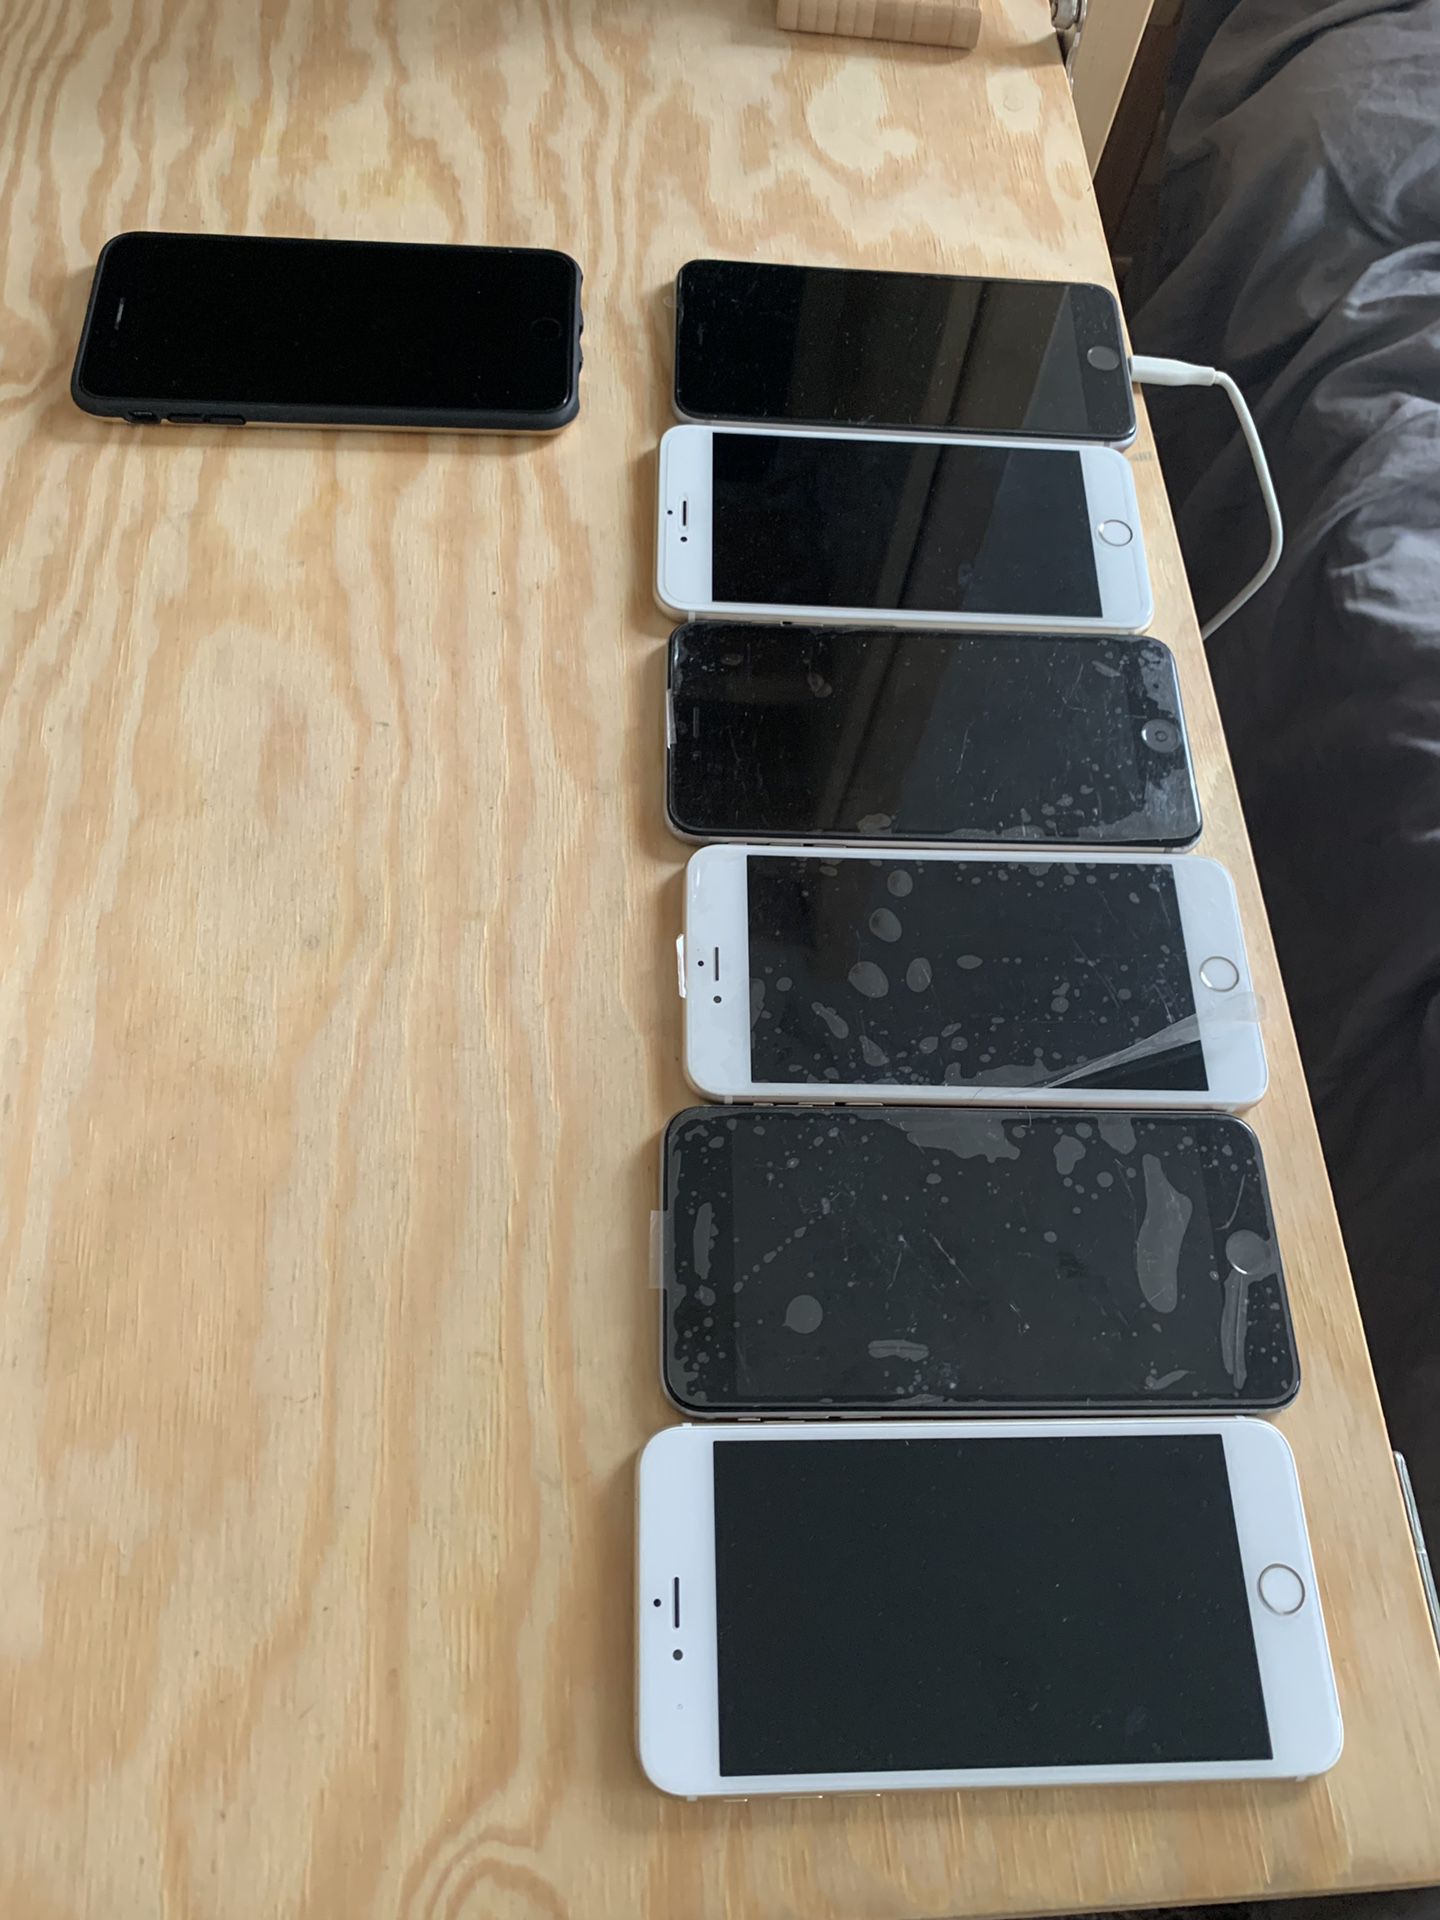 5 Iphone 6plus All iCloud lock 🔐 200$ for all 5